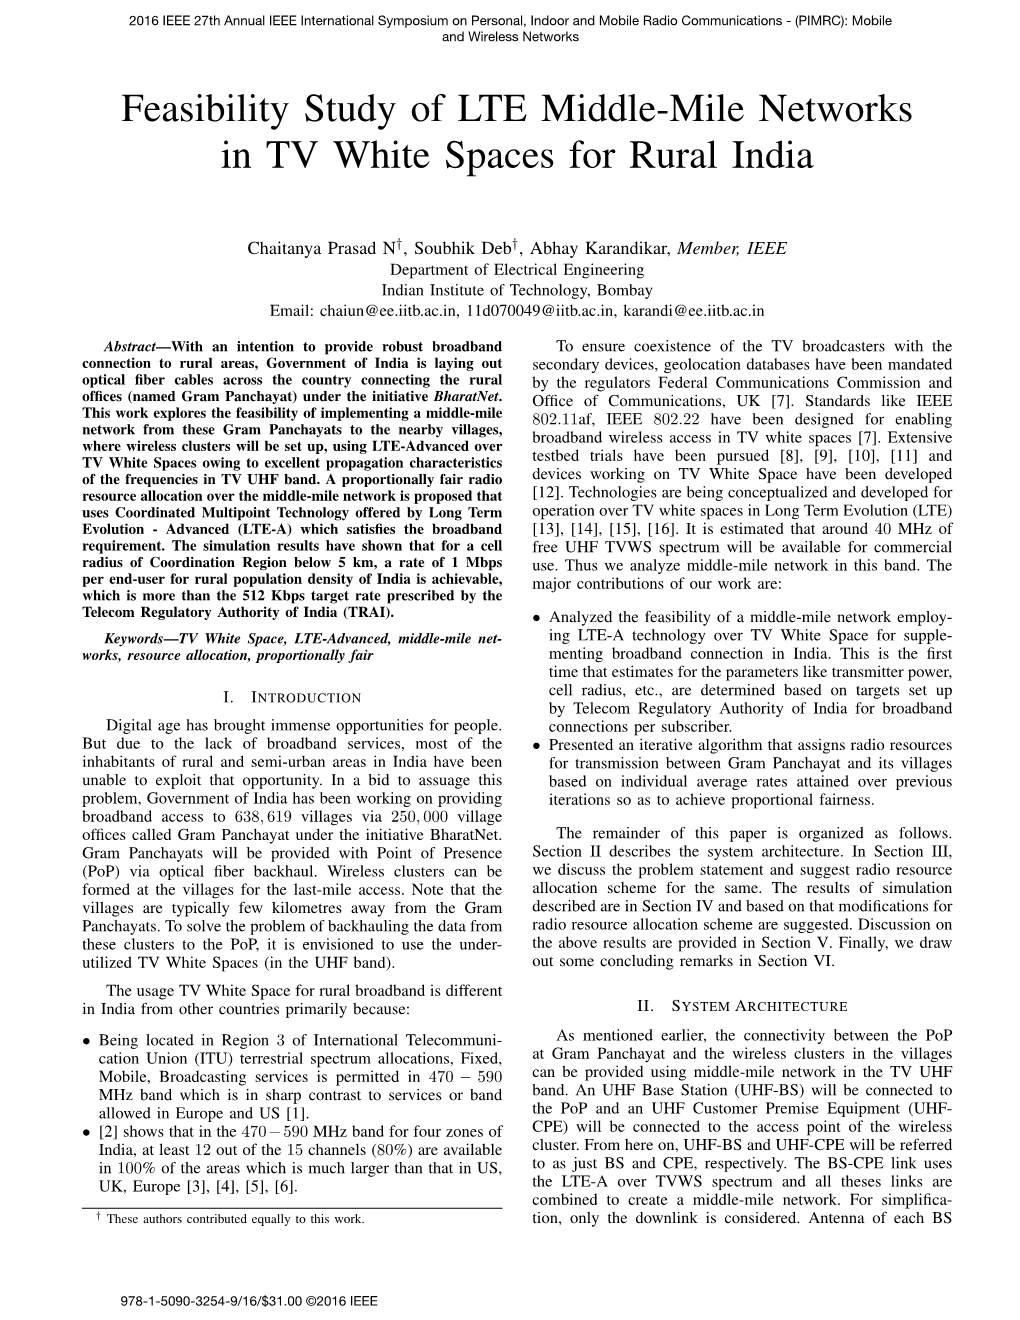 Feasibility Study of LTE Middle-Mile Networks in TV White Spaces for Rural India